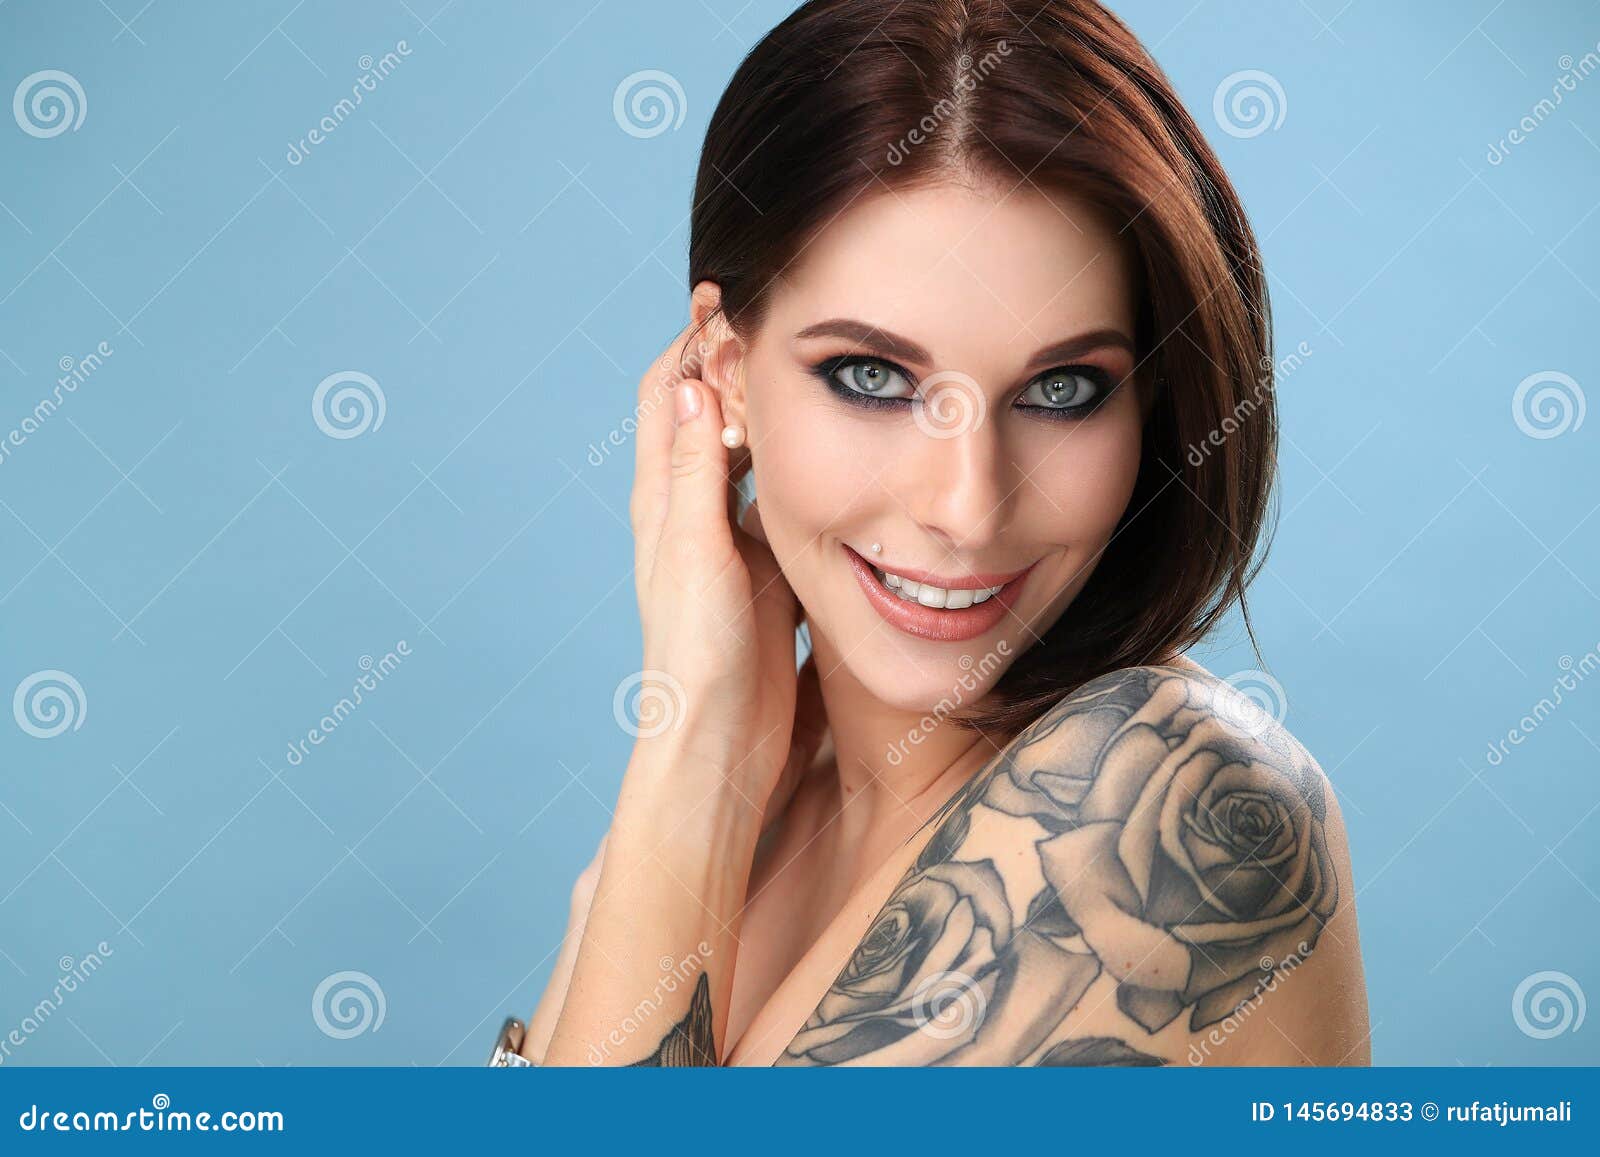 Portrait of Bald Woman with Tattoos Screaming · Free Stock Photo